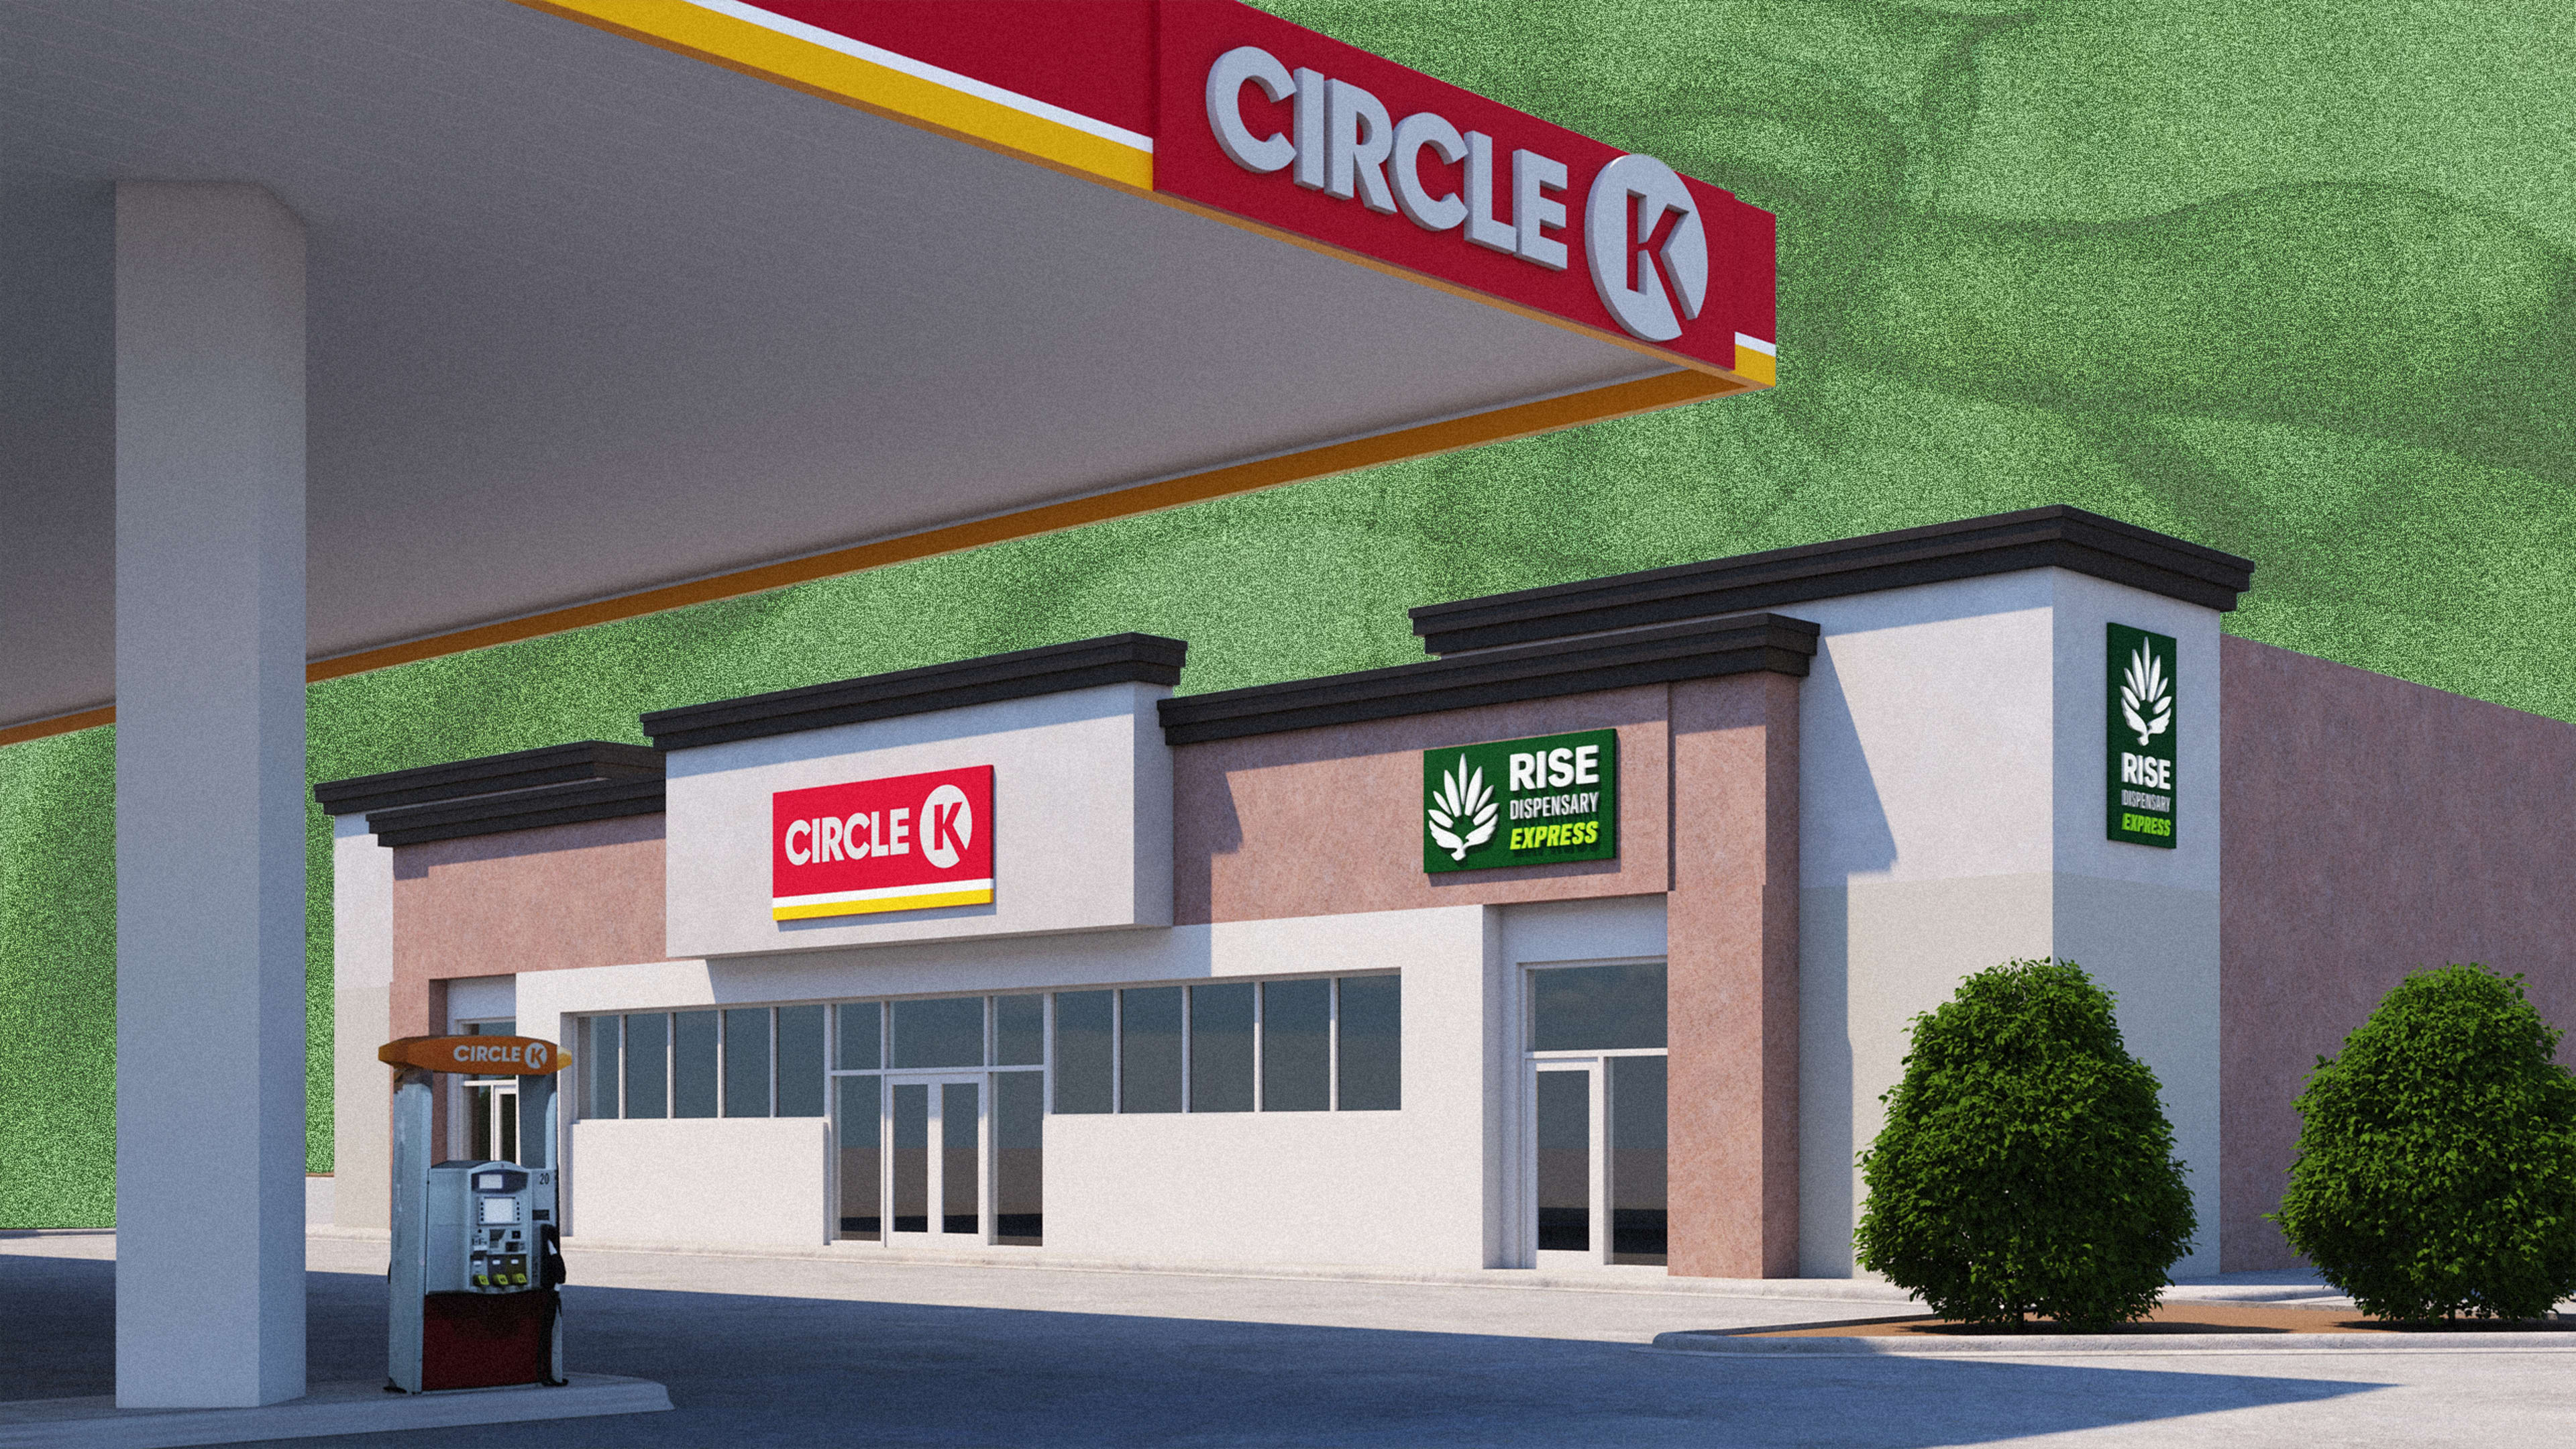 Weed is coming to Circle K